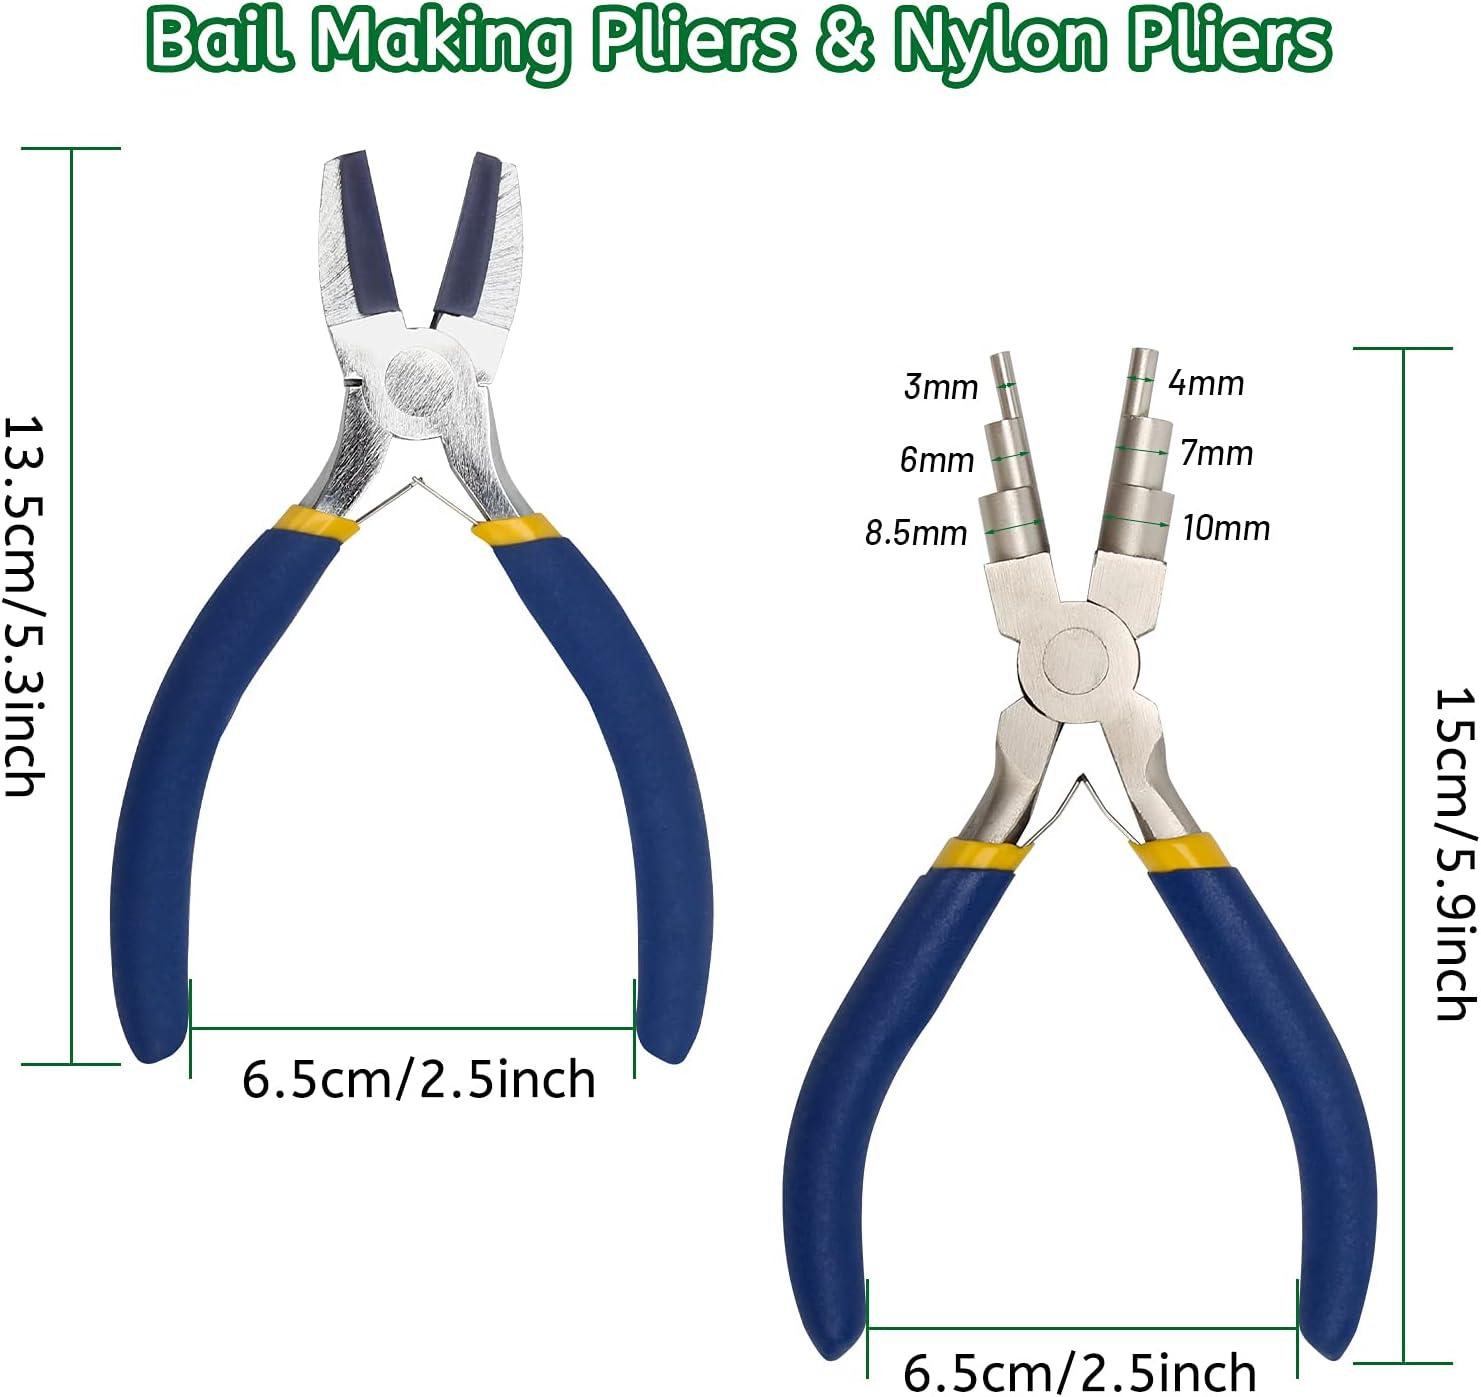 2 Packs Nylon Nose Pliers Double Nylon Pliers Carbon Steel Jewelry Pliers DIY Tools for Beading, Looping, Shaping Wire, Jewelry Making and Other